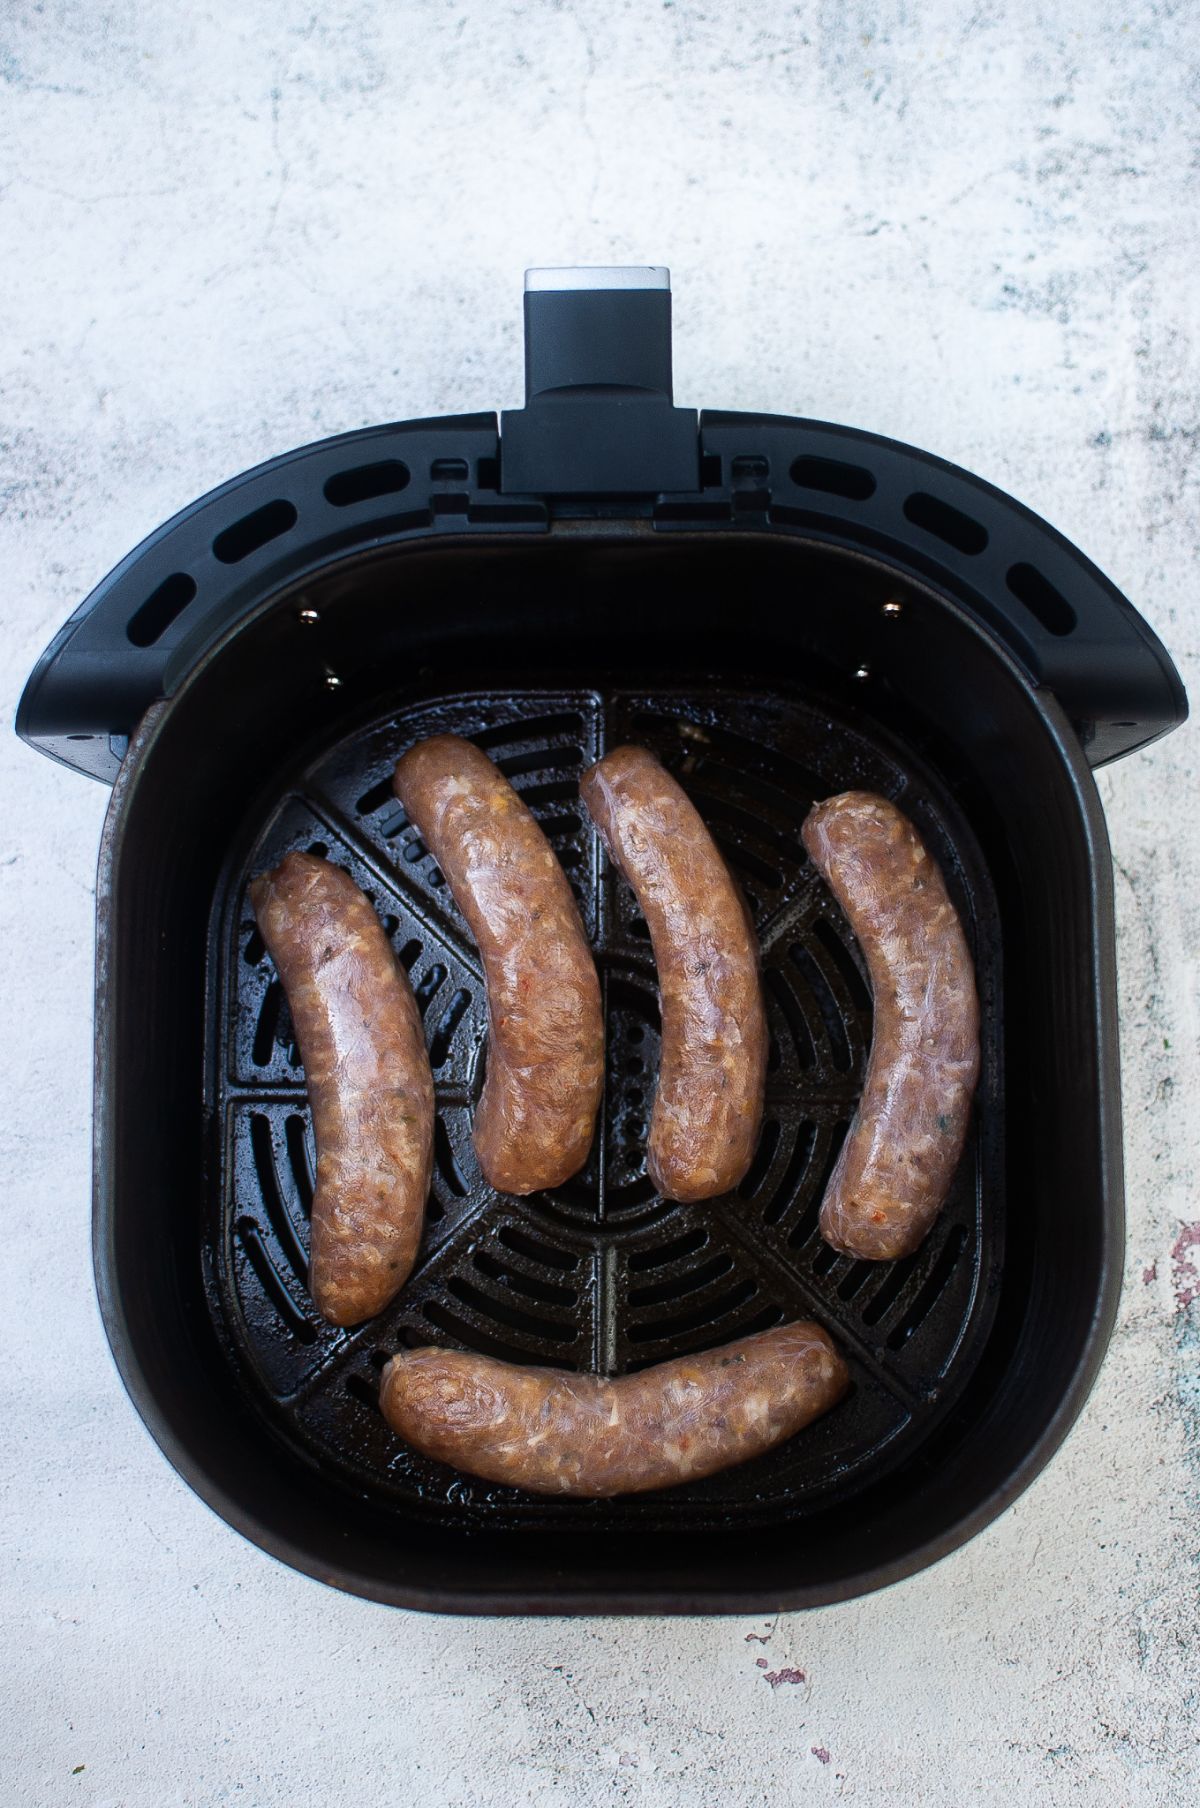 Five sausages inside the Air Fryer.